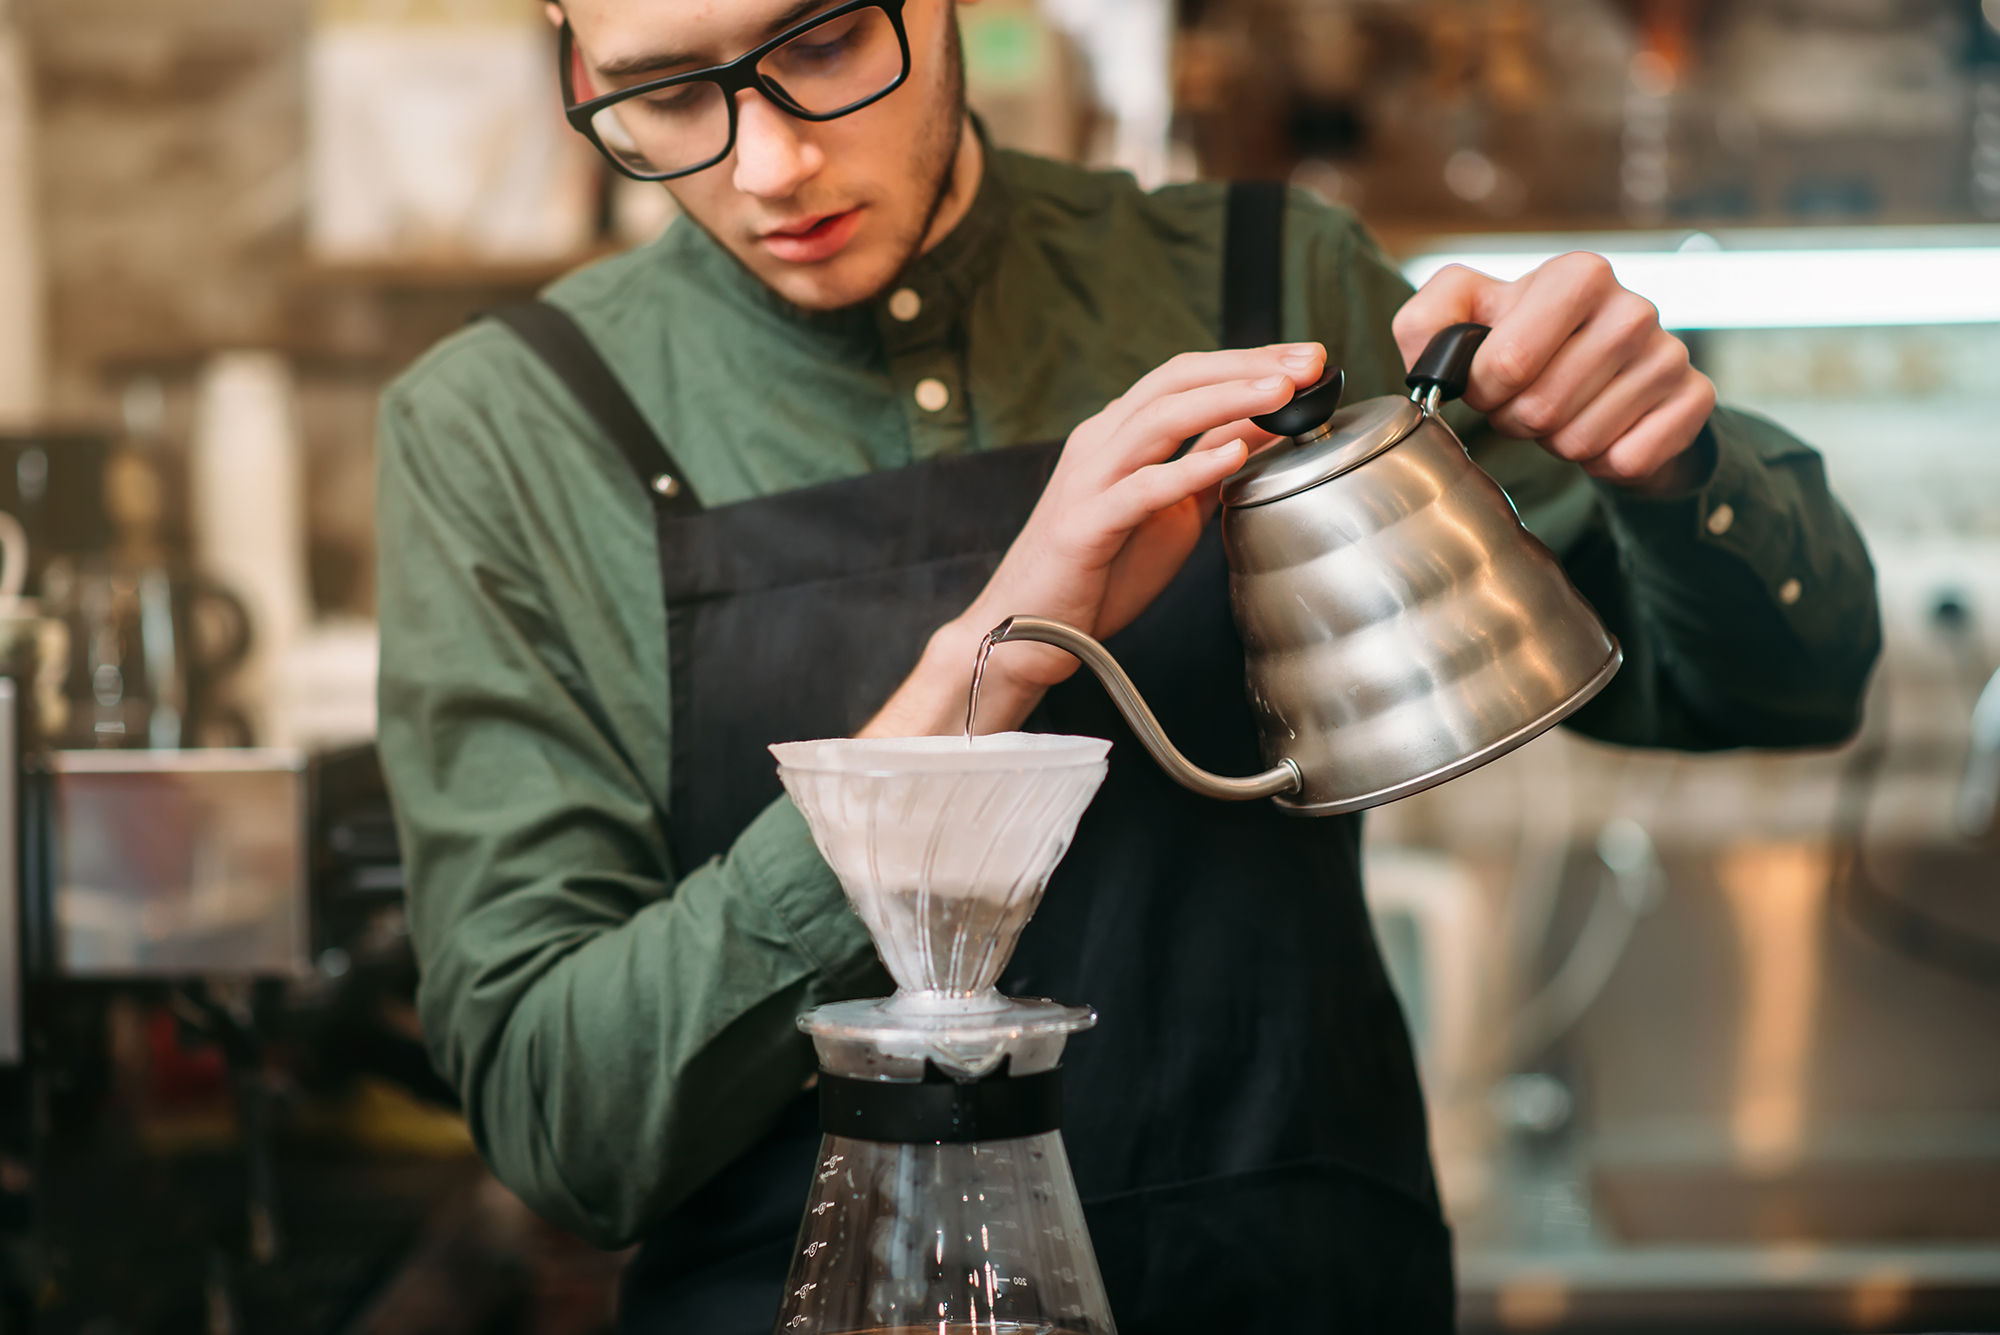 Coffee 101: Attend these coffee workshops in KL to level up your knowledge